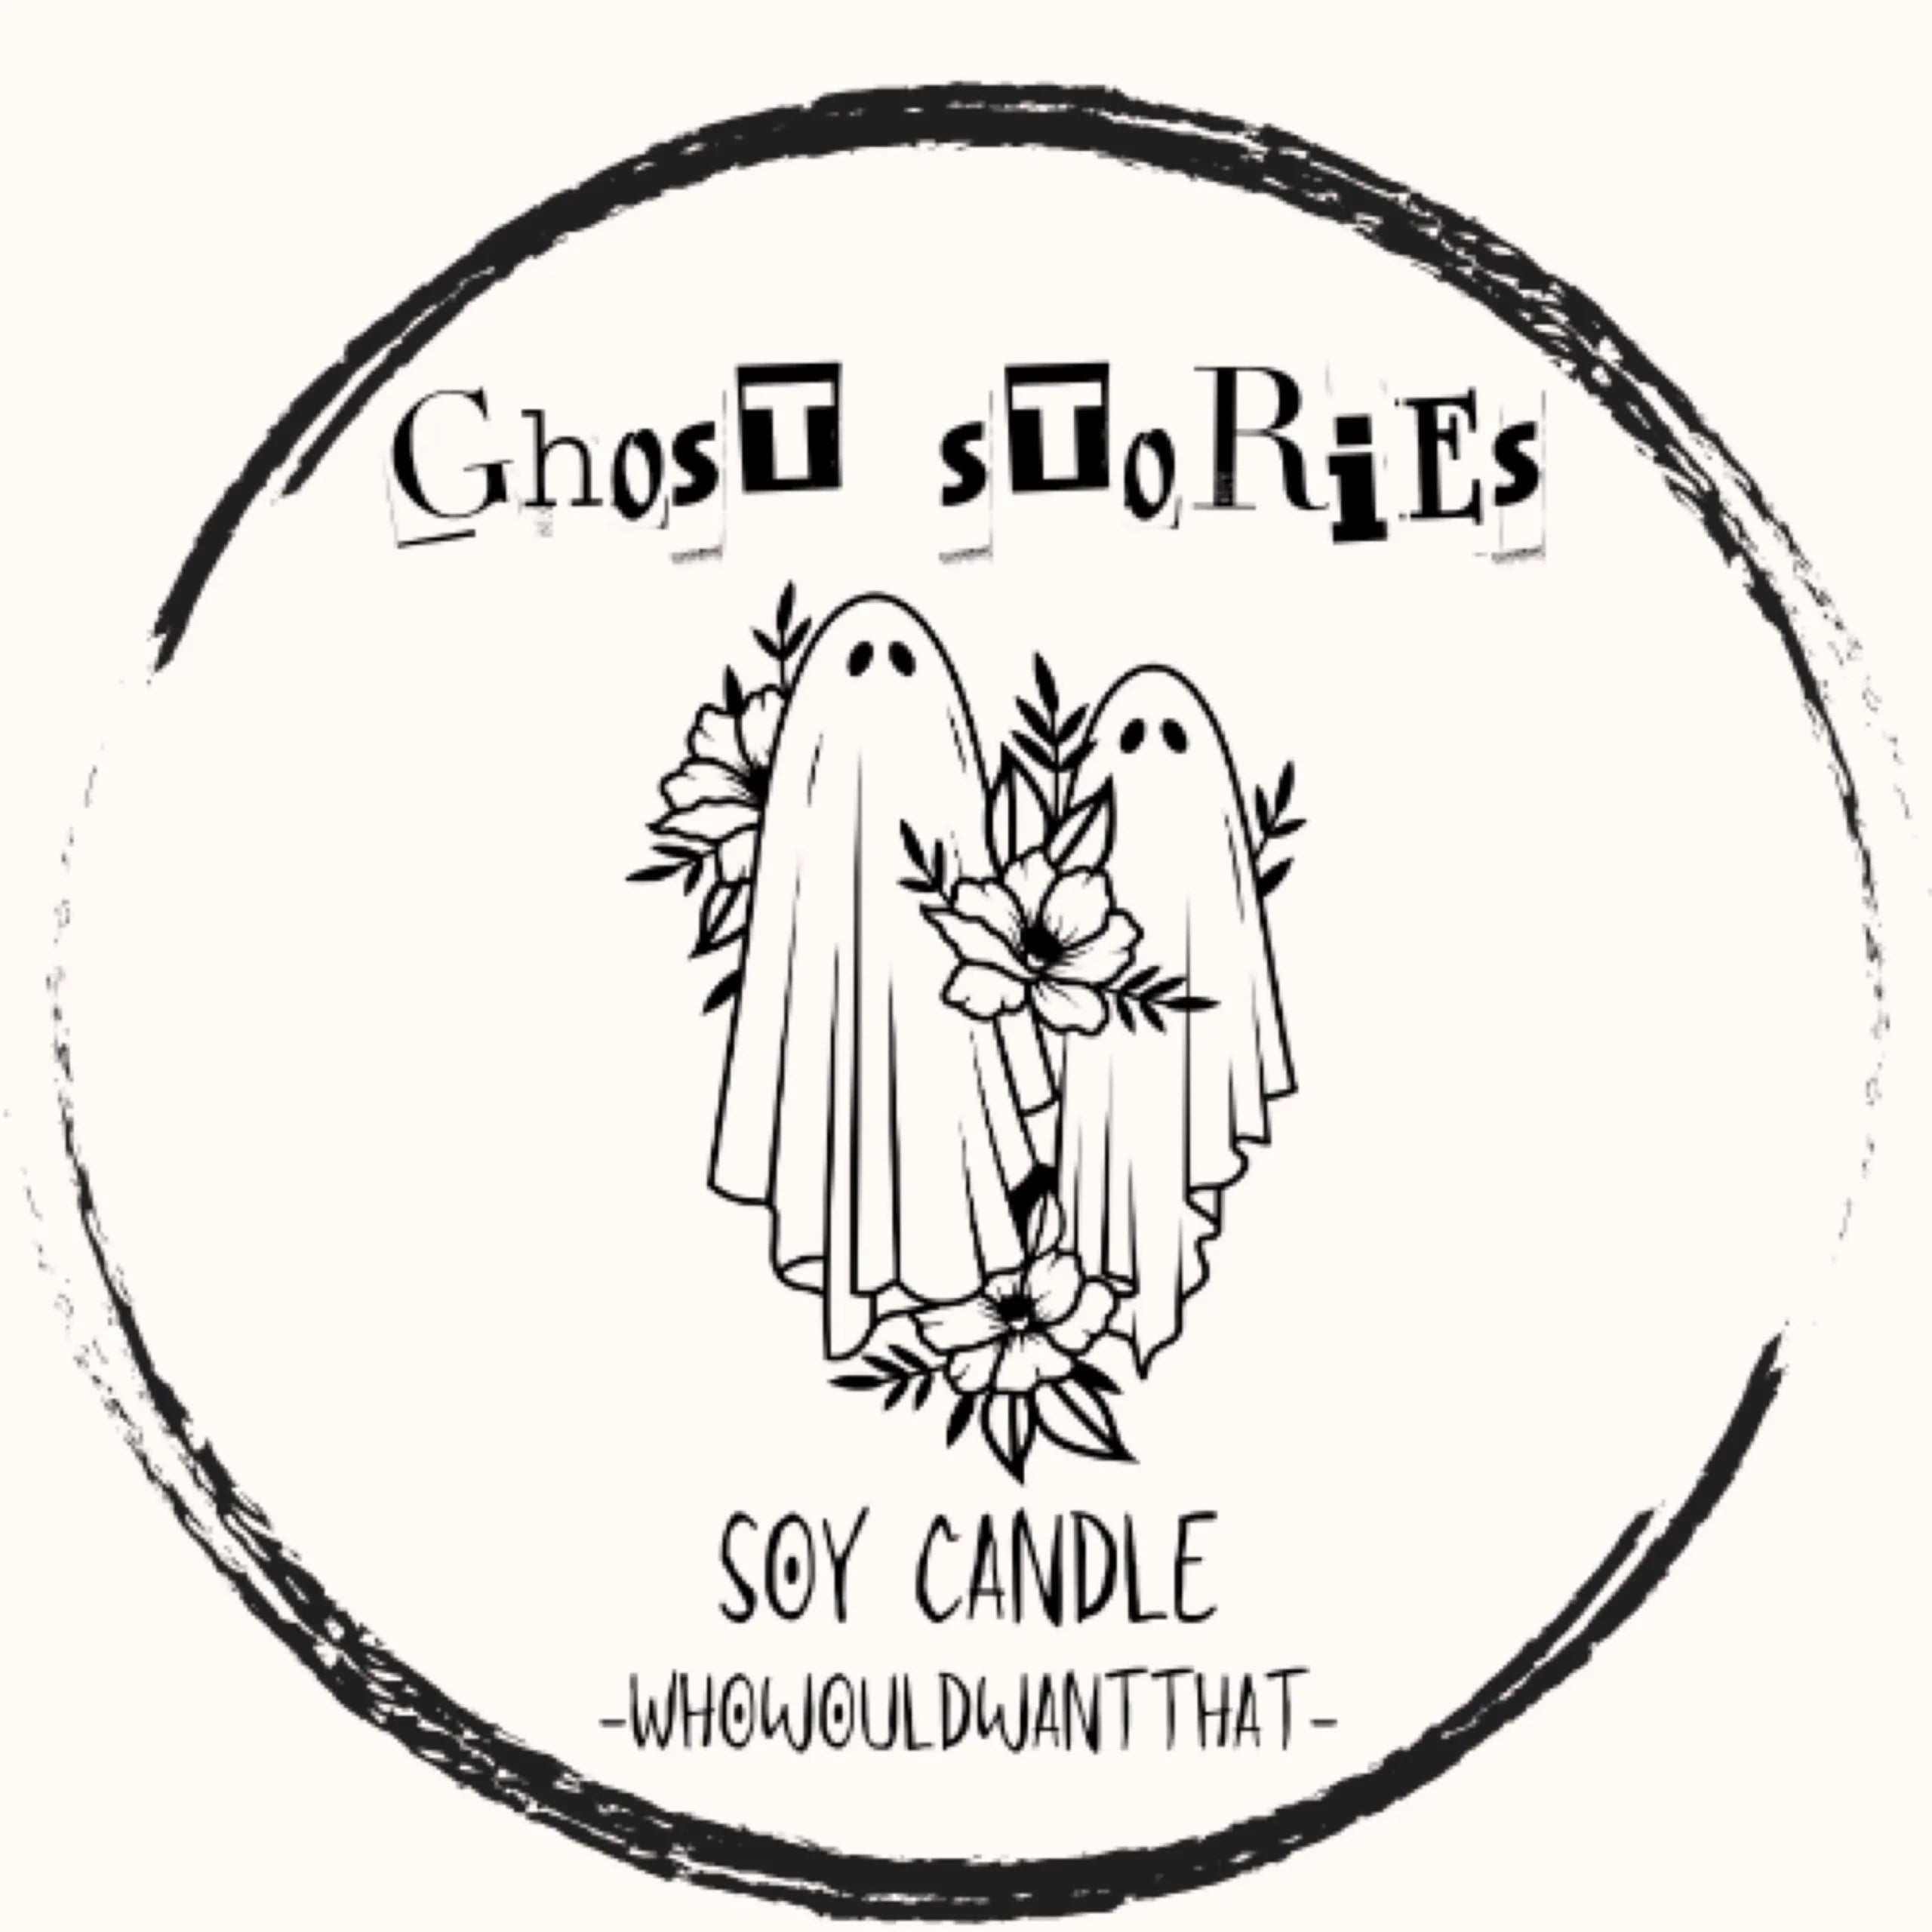 Ghost Stories Candle - 4 oz Scented Soy Candle - Who Would Want That